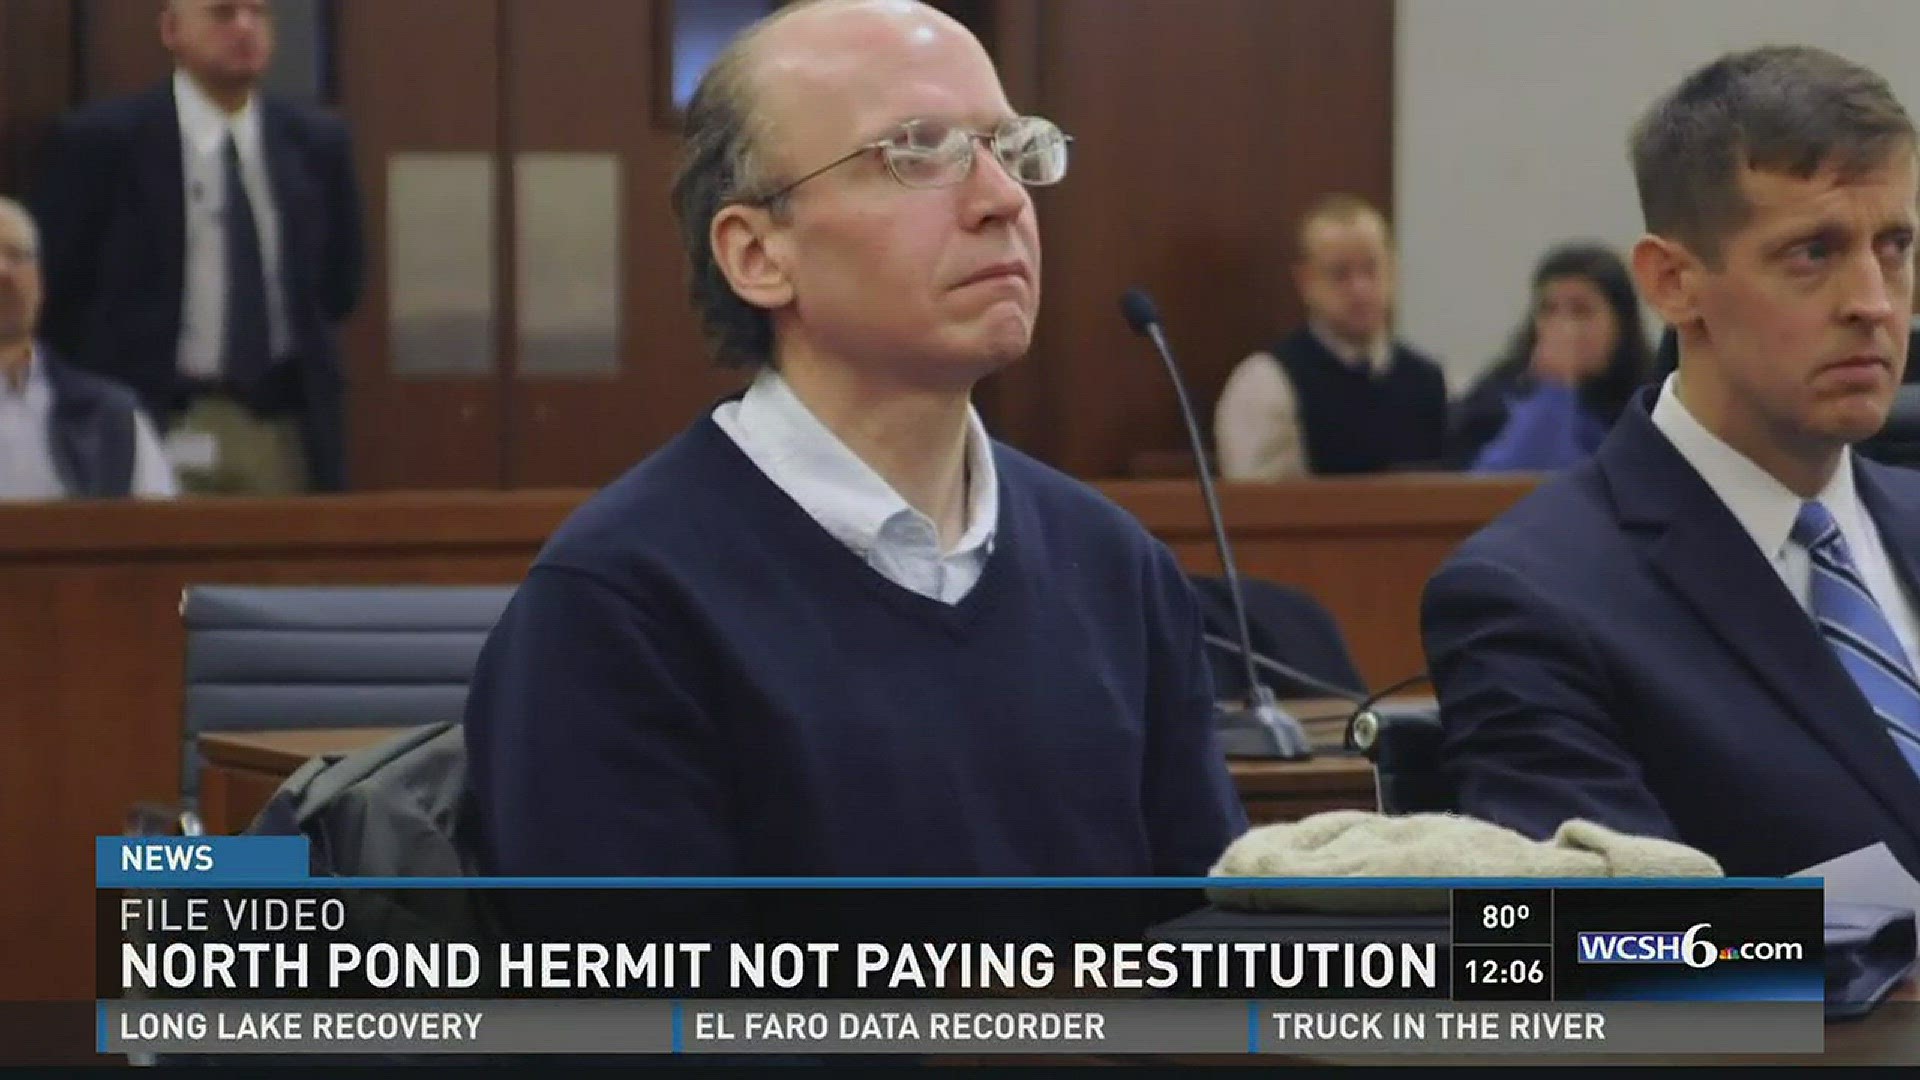 North Pond hermit not paying restitution